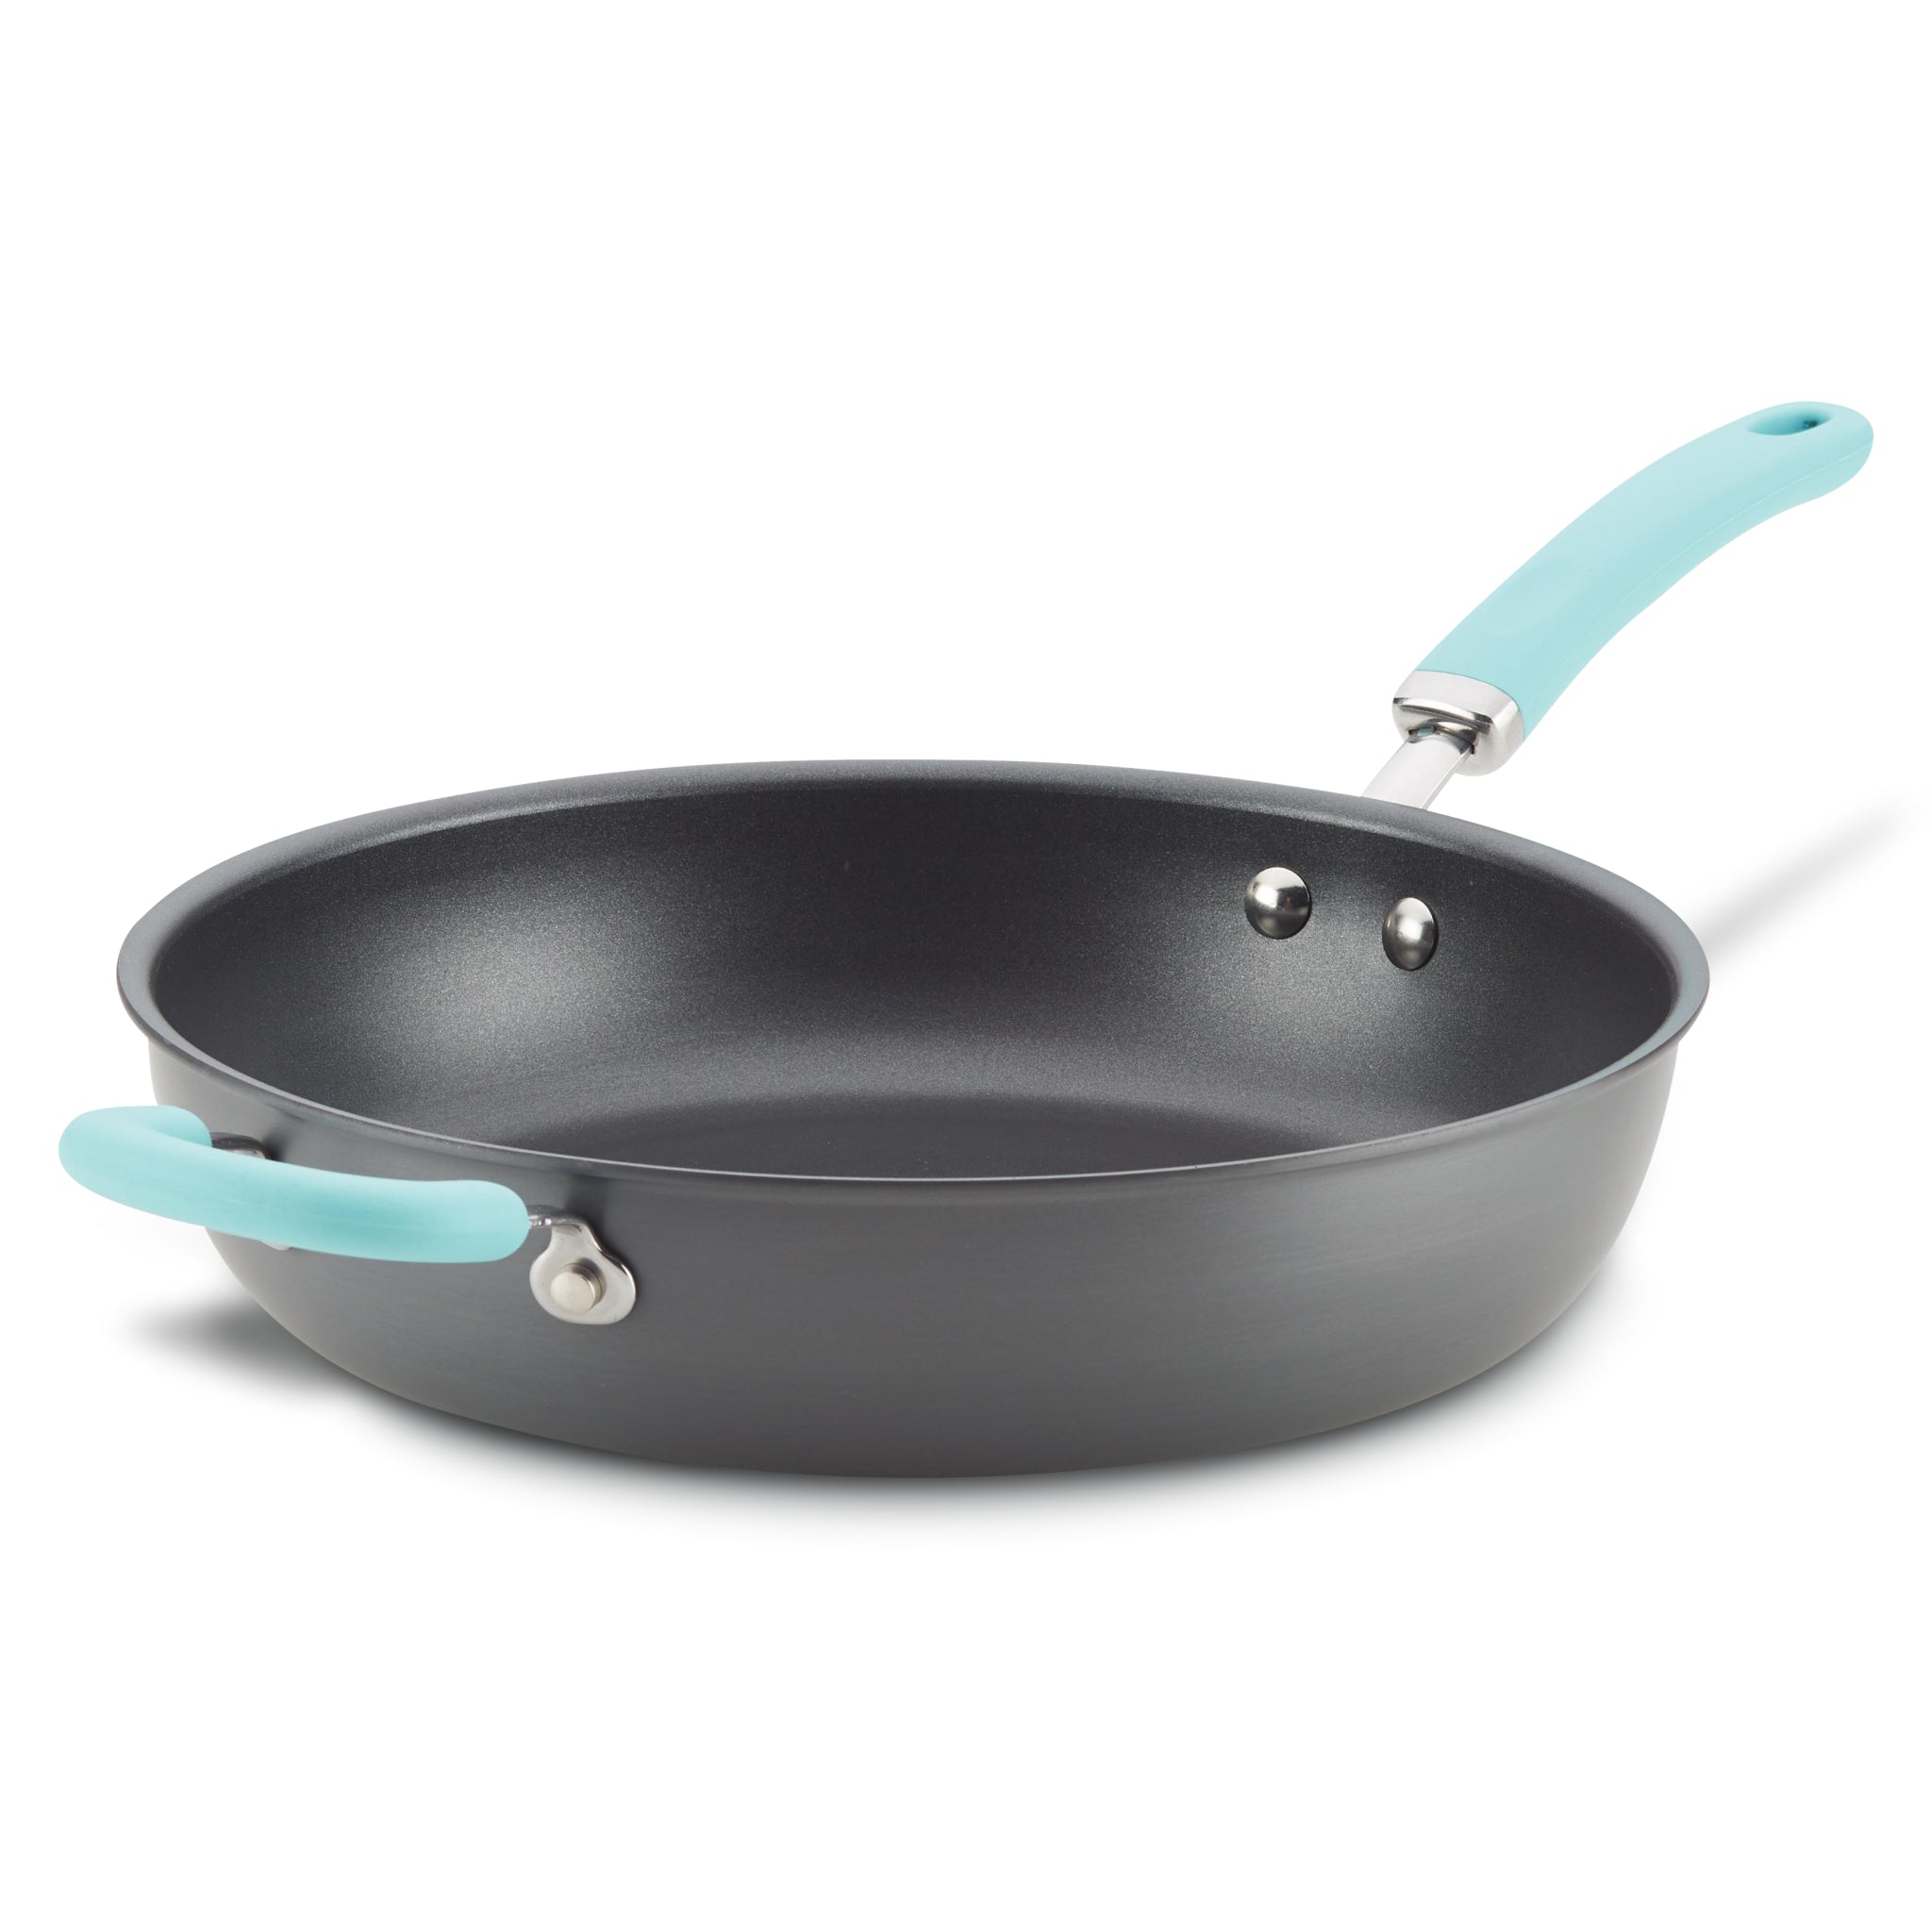 12.5-Inch Hard Anodized Nonstick Induction Deep Frying Pan with Helper Handle